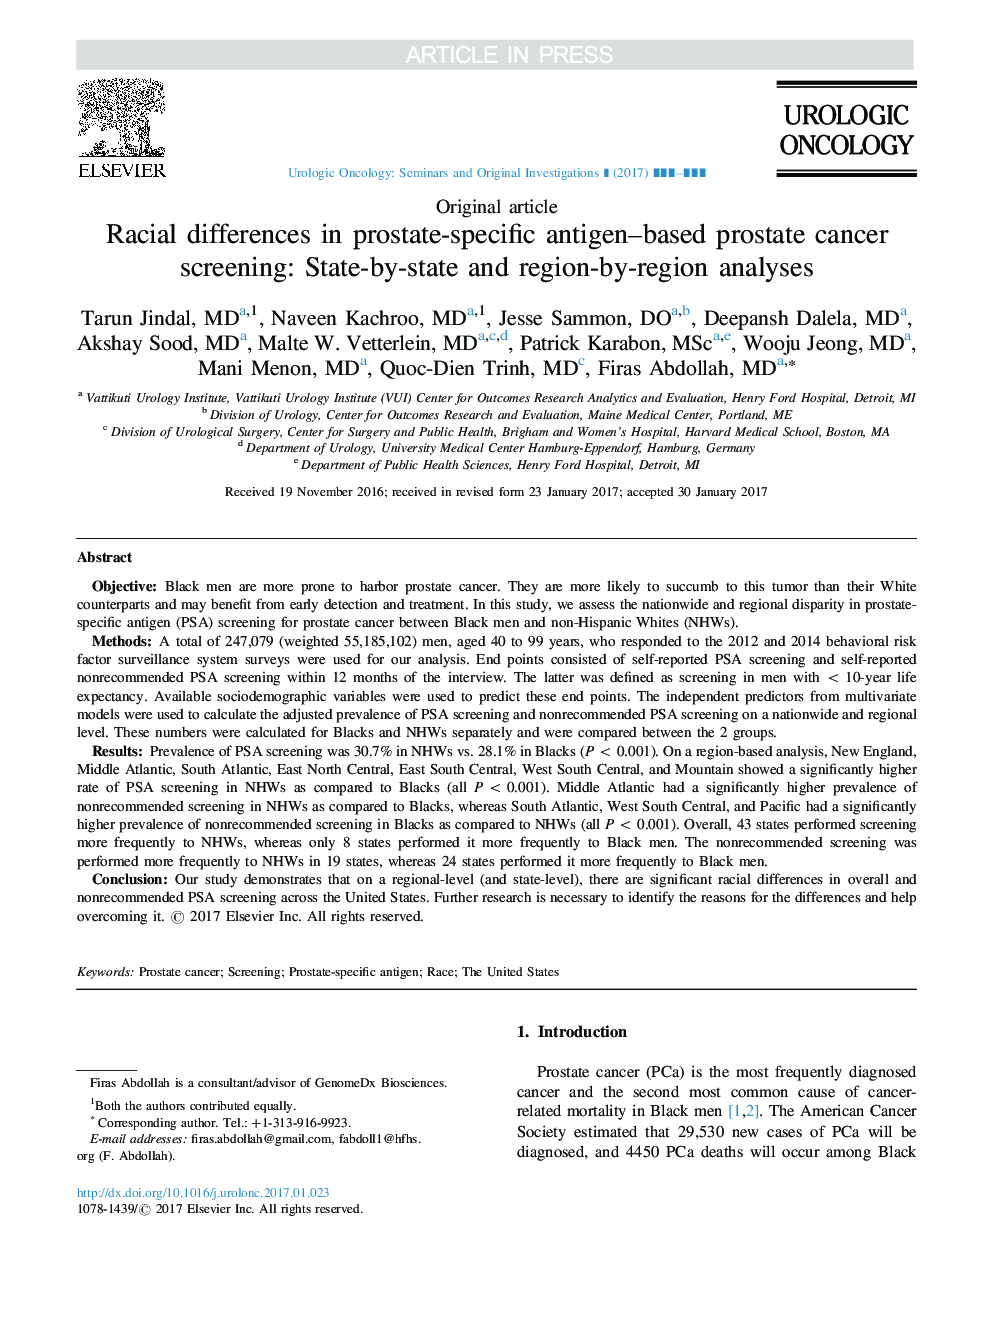 Racial differences in prostate-specific antigen-based prostate cancer screening: State-by-state and region-by-region analyses